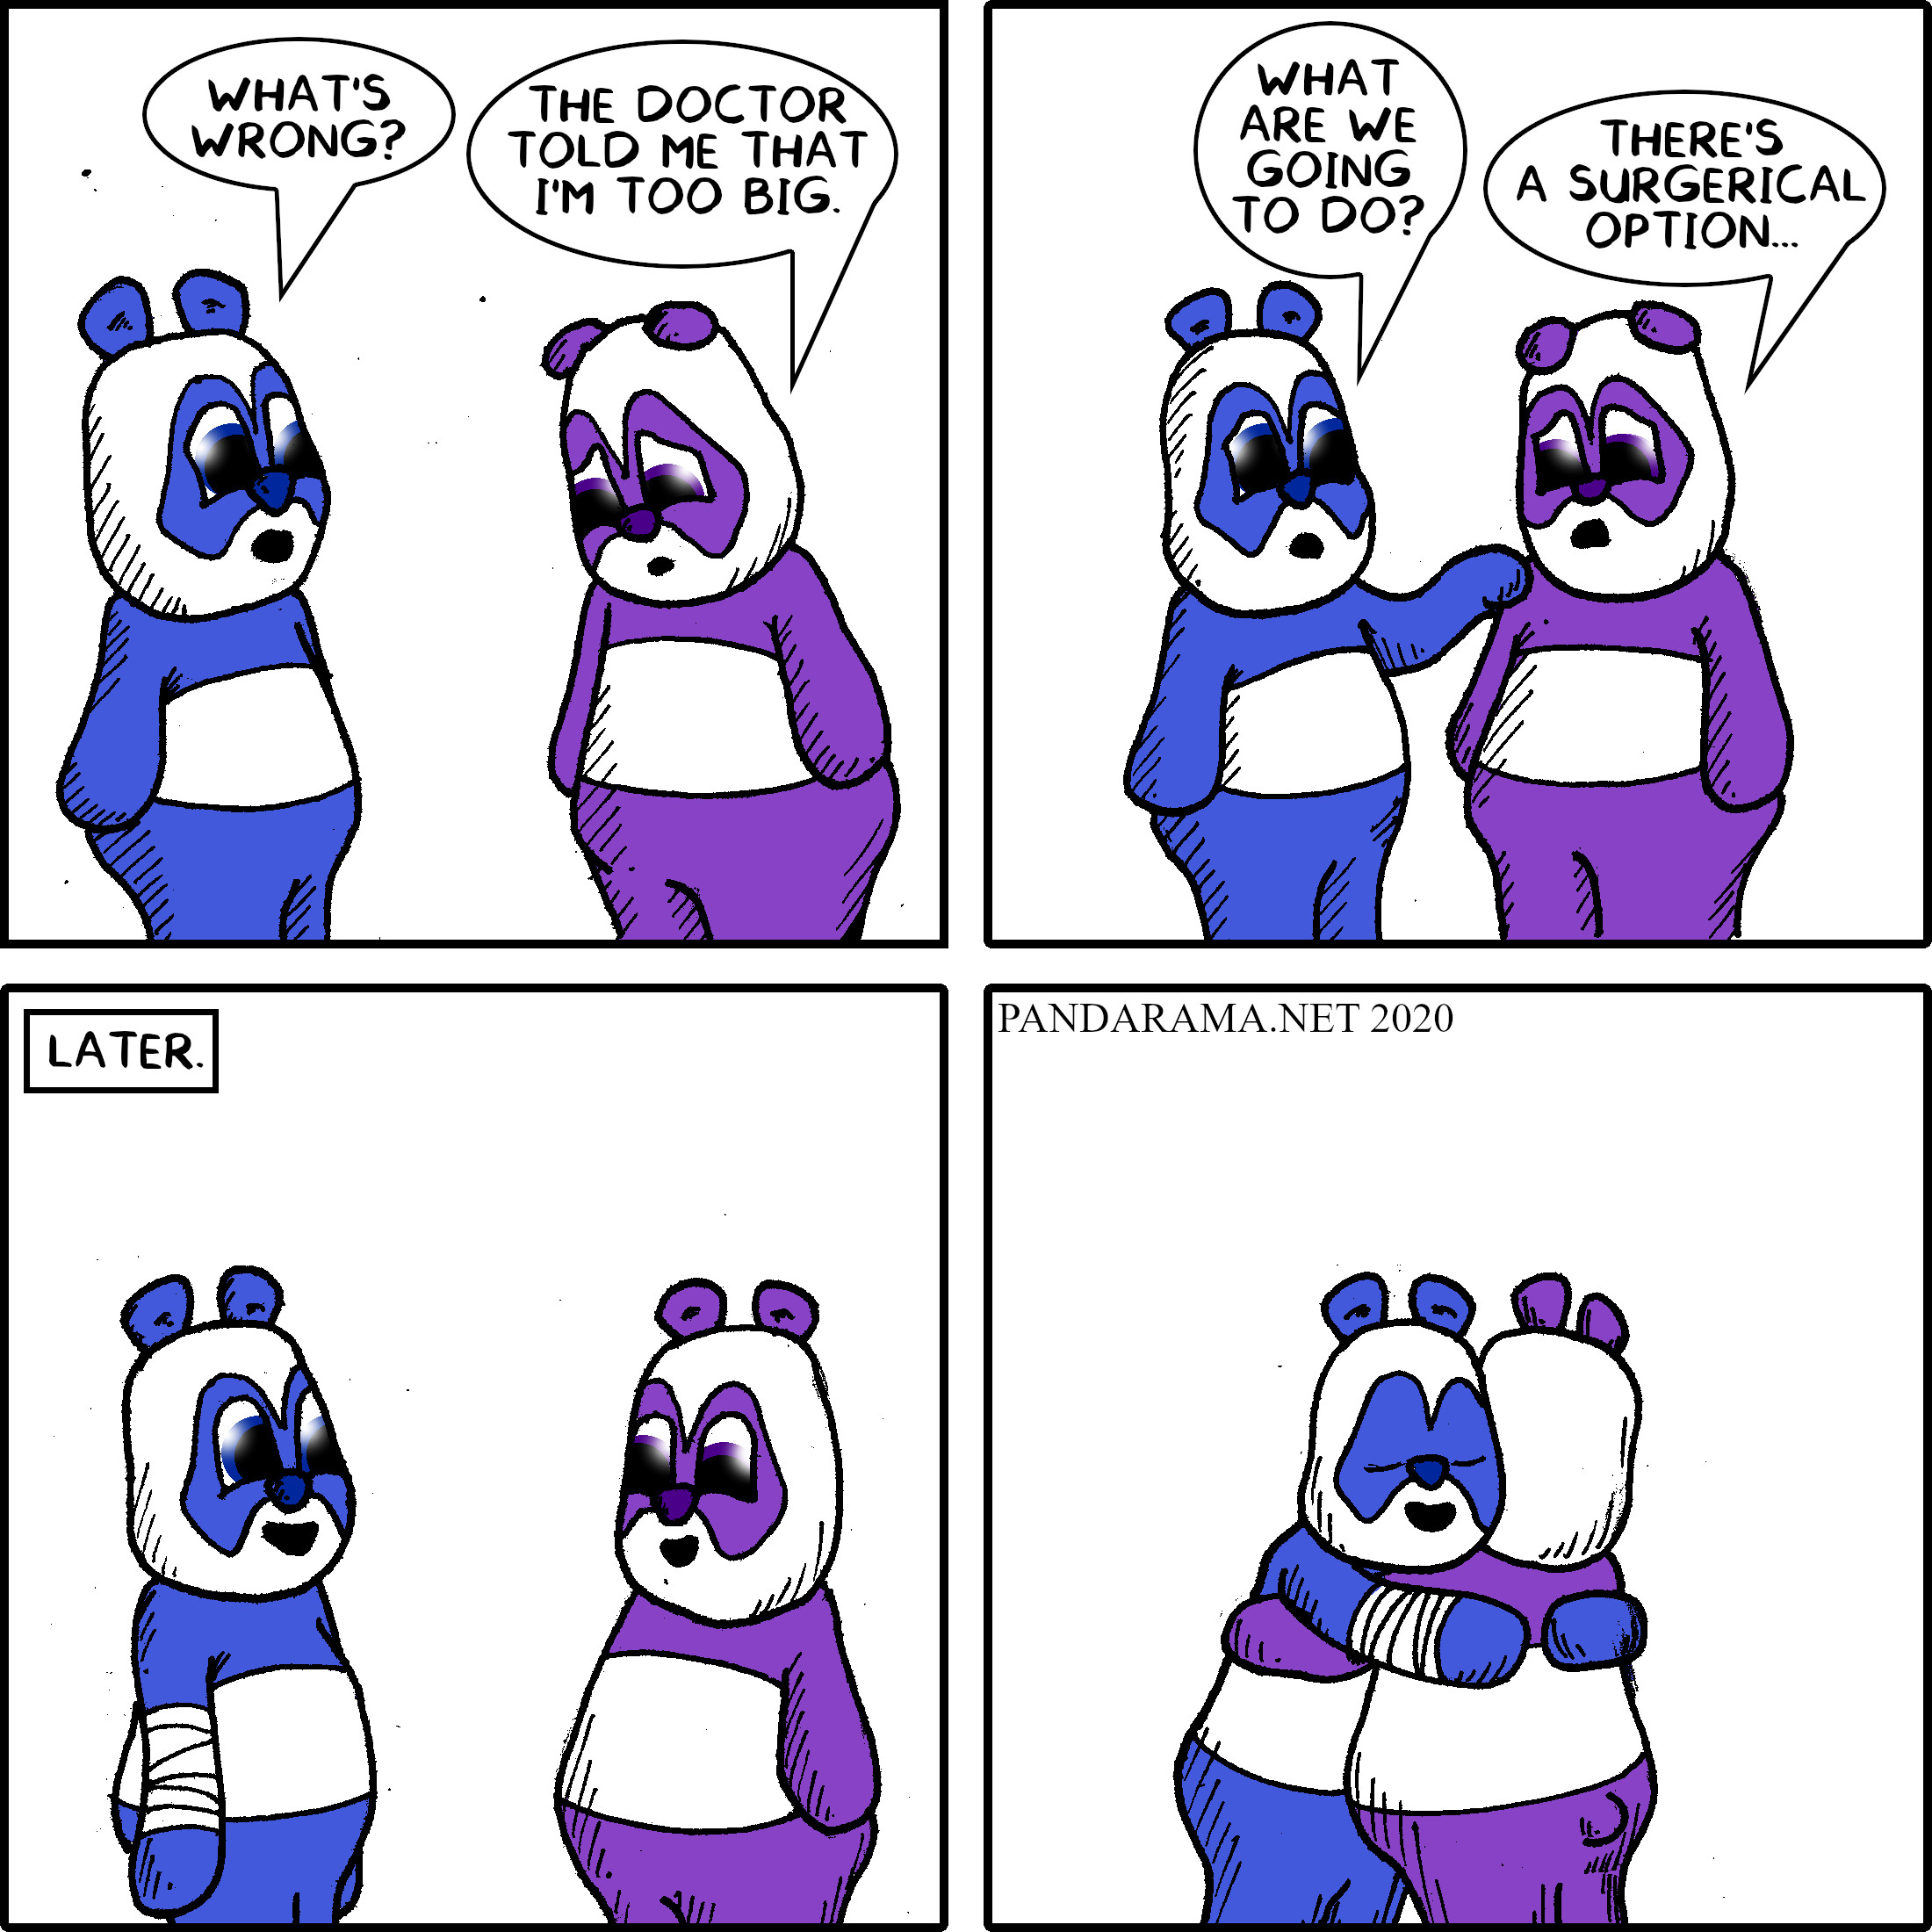 webcomic where one panda gets fat and the other panda gets arm extension so they can hug.